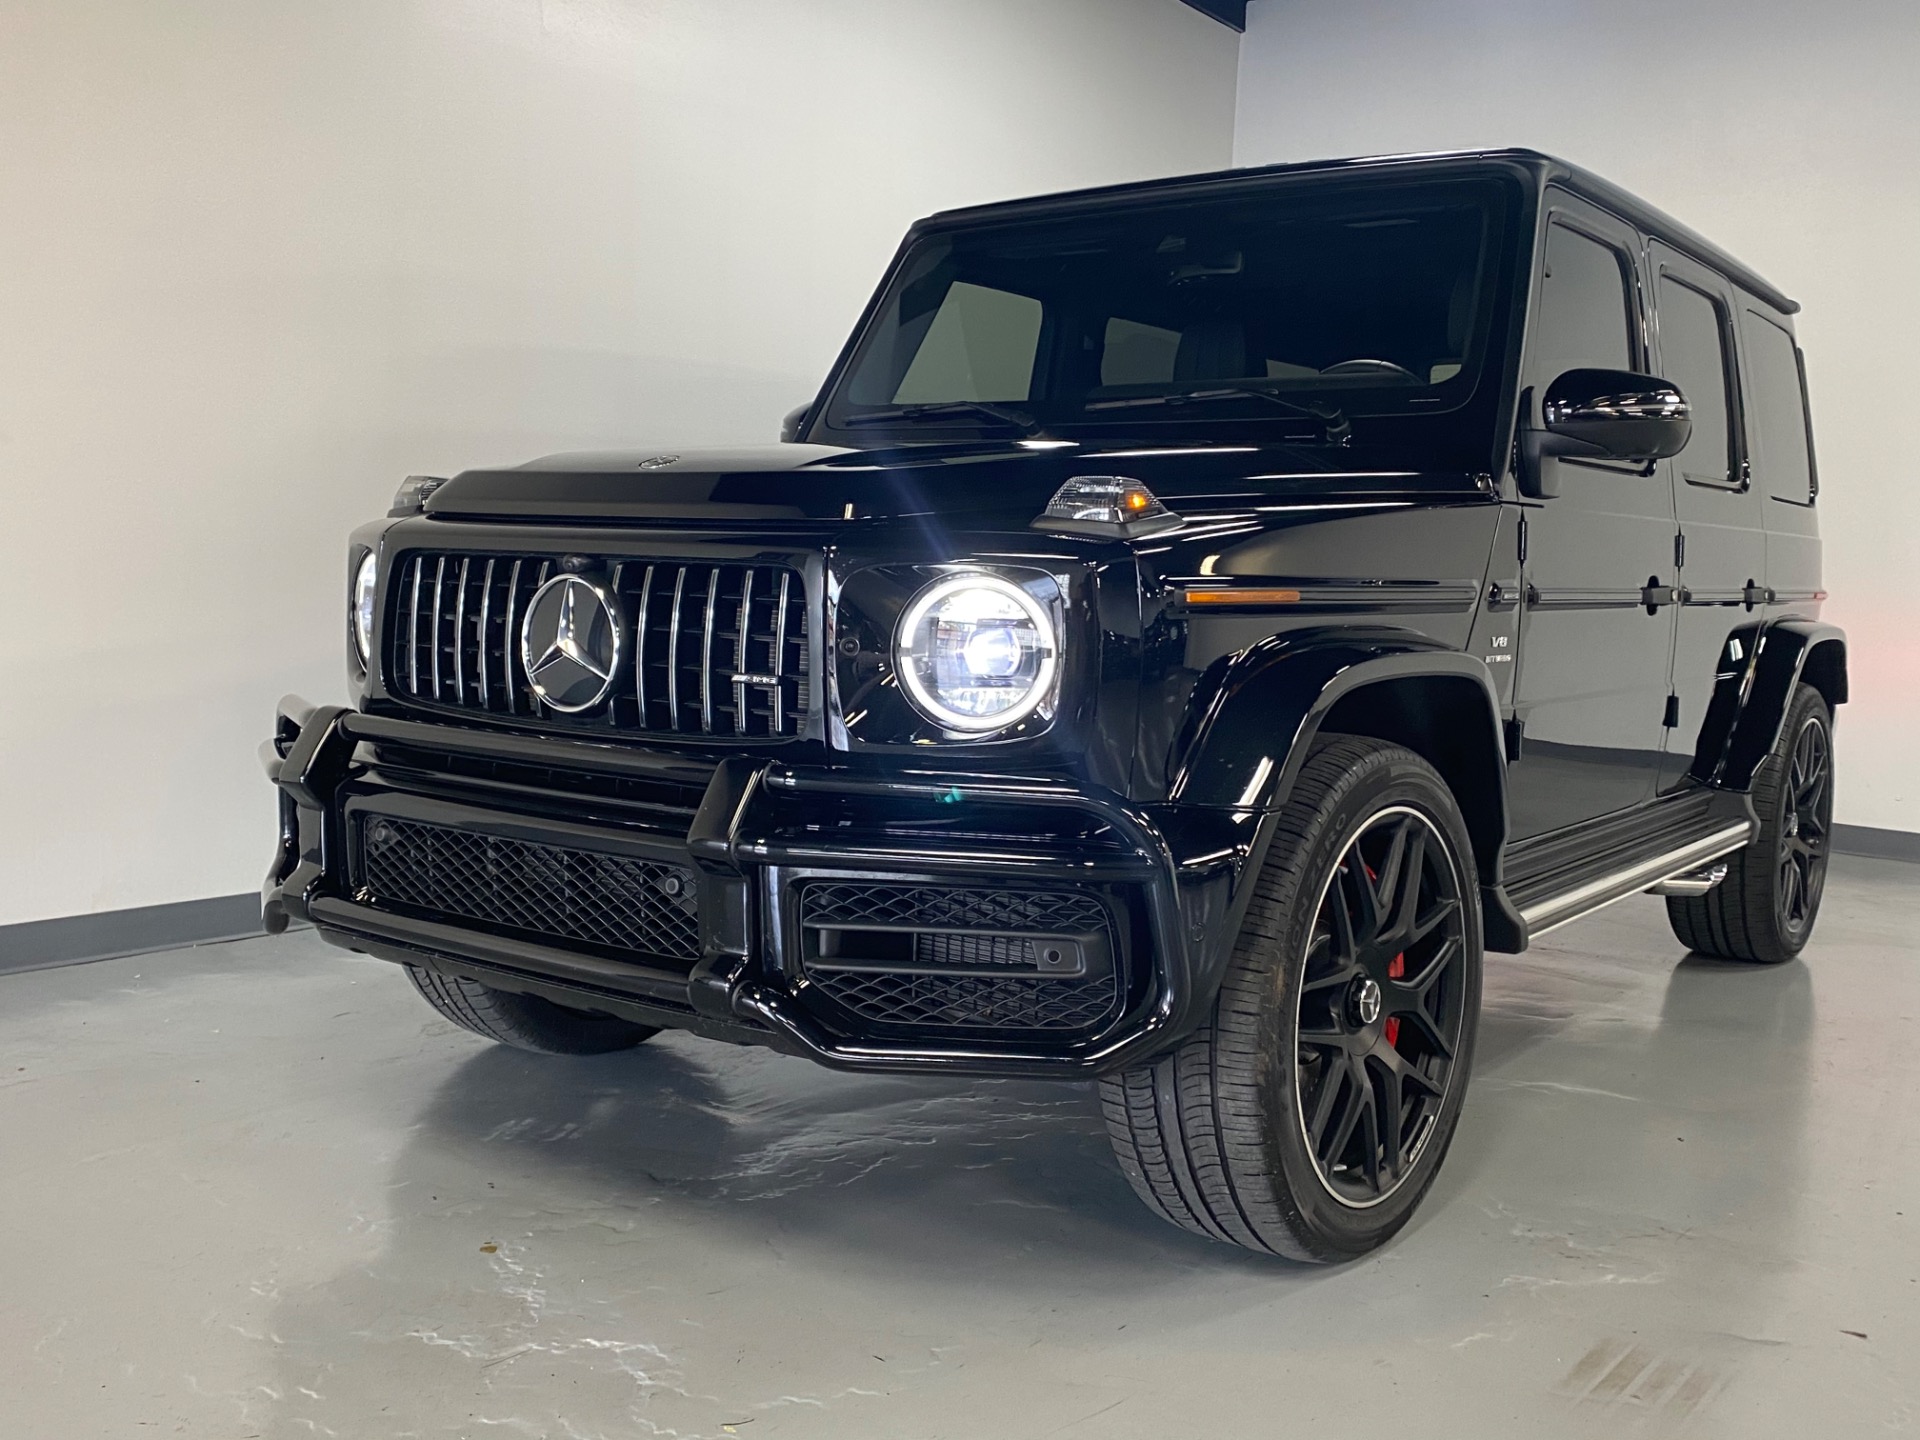 Used Obsidian Black Metallic Mercedes Benz G Class G63 Amg Awd Amg G 63 For Sale Sold Prime Motorz Stock 2928